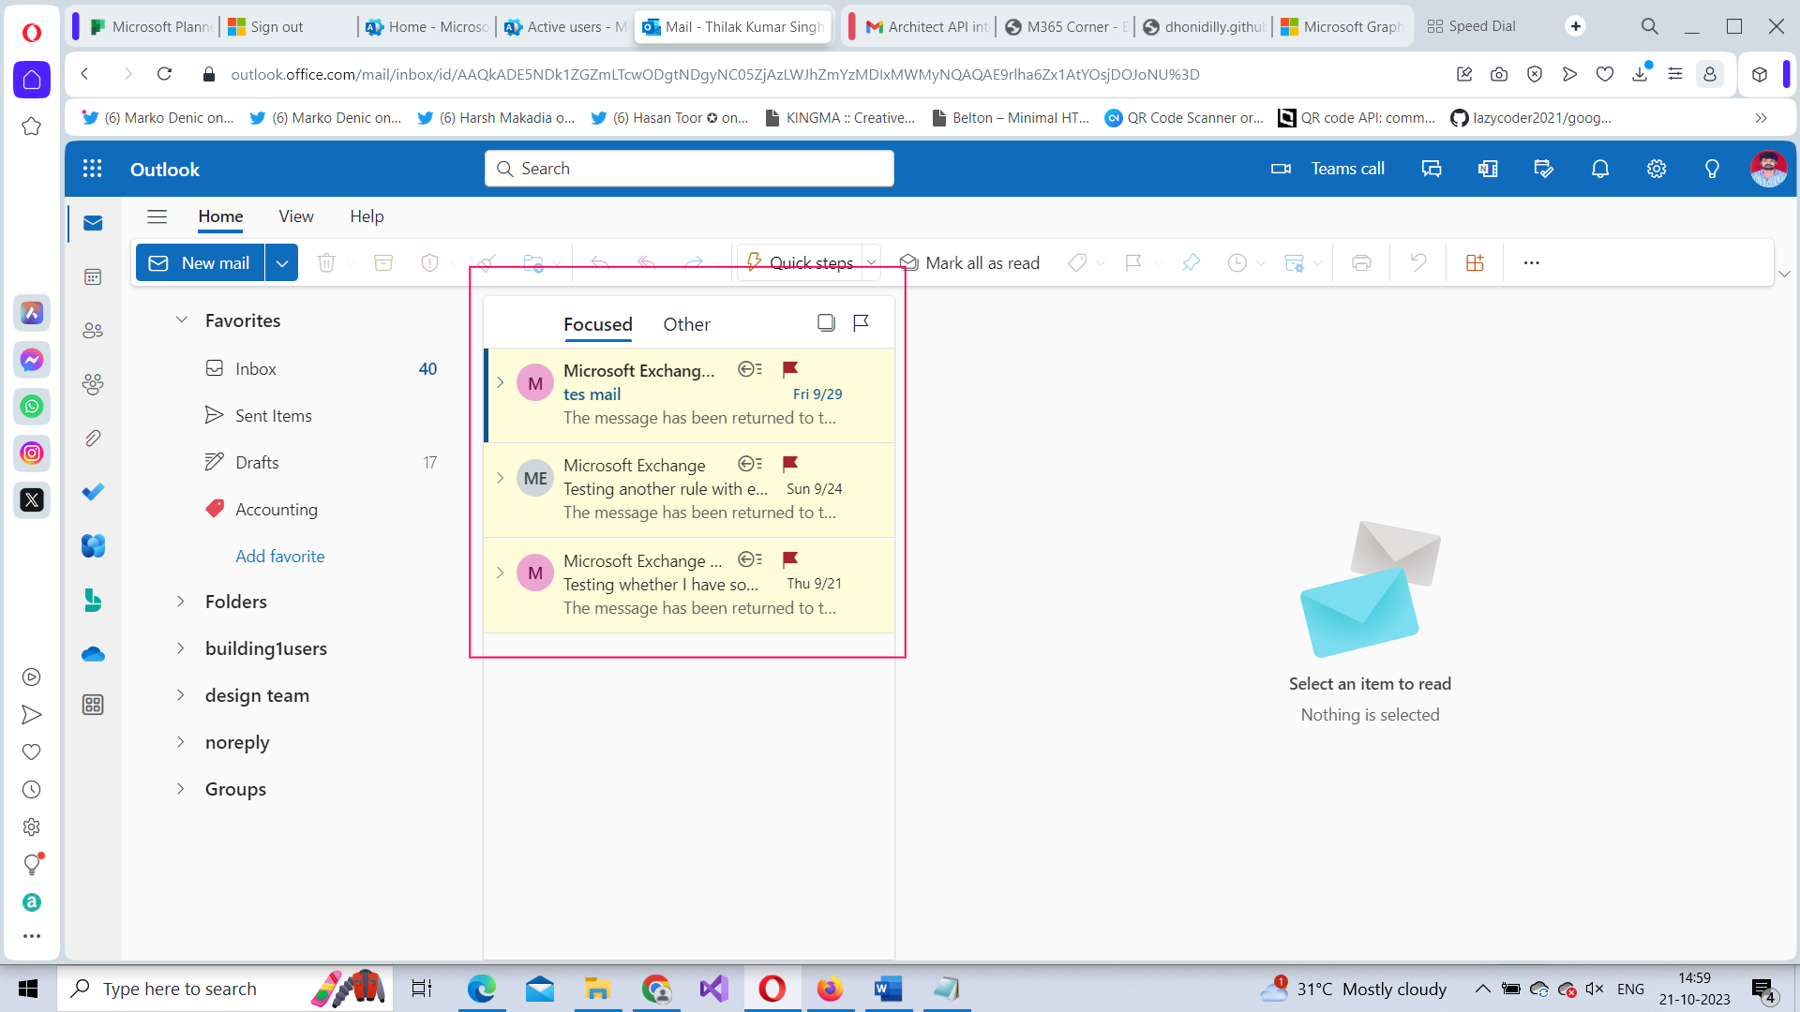 This screenshot shows all the flagged emails listed in Microsoft 365 Outlook on the web.